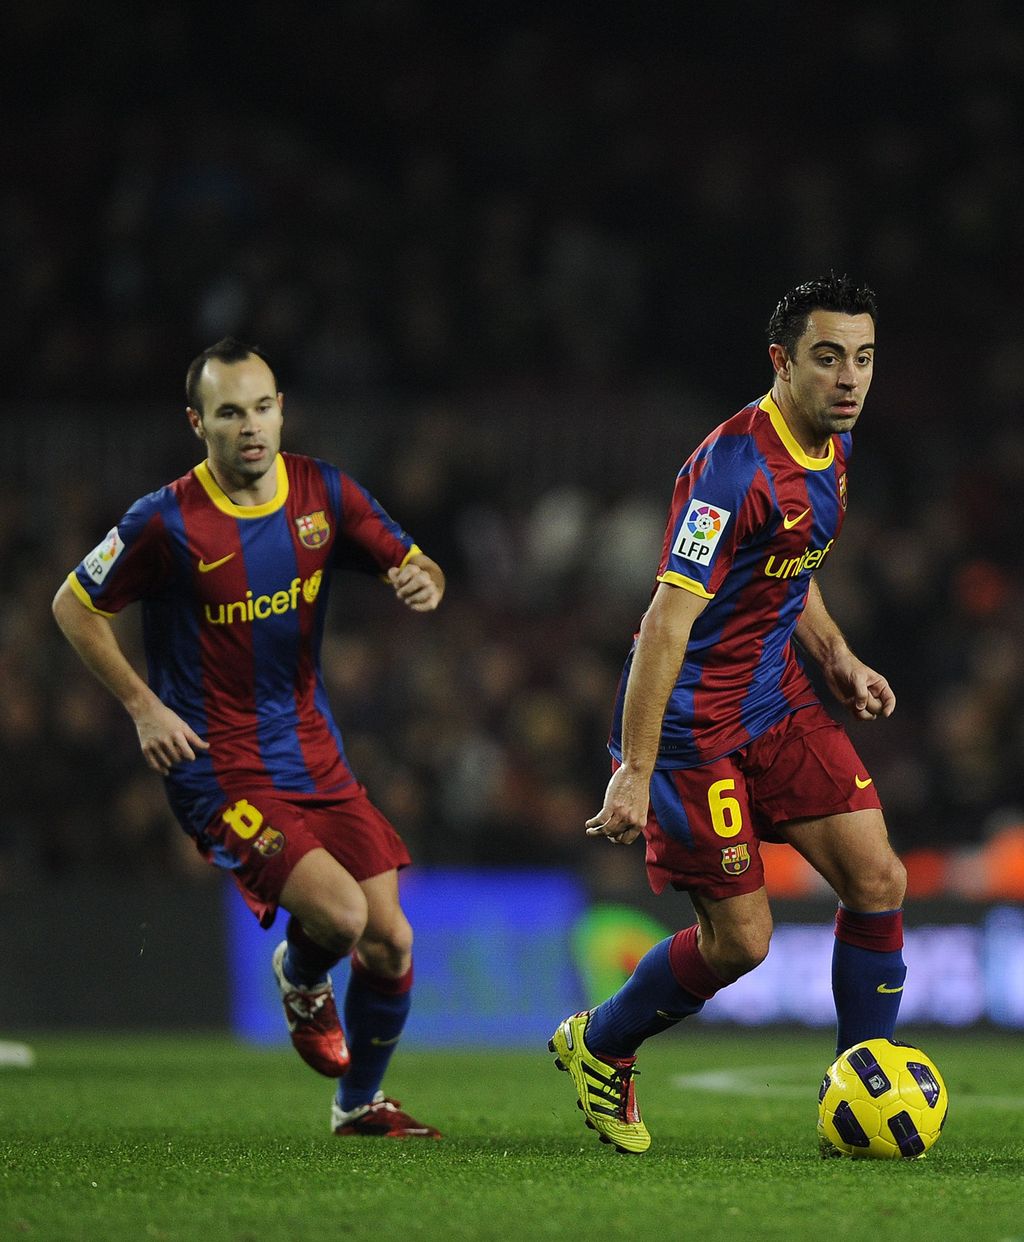 BARCELONA, SPAIN - JANUARY 12:  Xavi Hernandez of FC Barcelona (R) and his teammate Andres Iniesta in action during the Copa del Rey quarter final first leg match between FC Barcelona and Betis at Camp Nou on January 12, 2011 in Barcelona, Spain. Barcelona won 5-0.  (Photo by David Ramos/Getty Images)